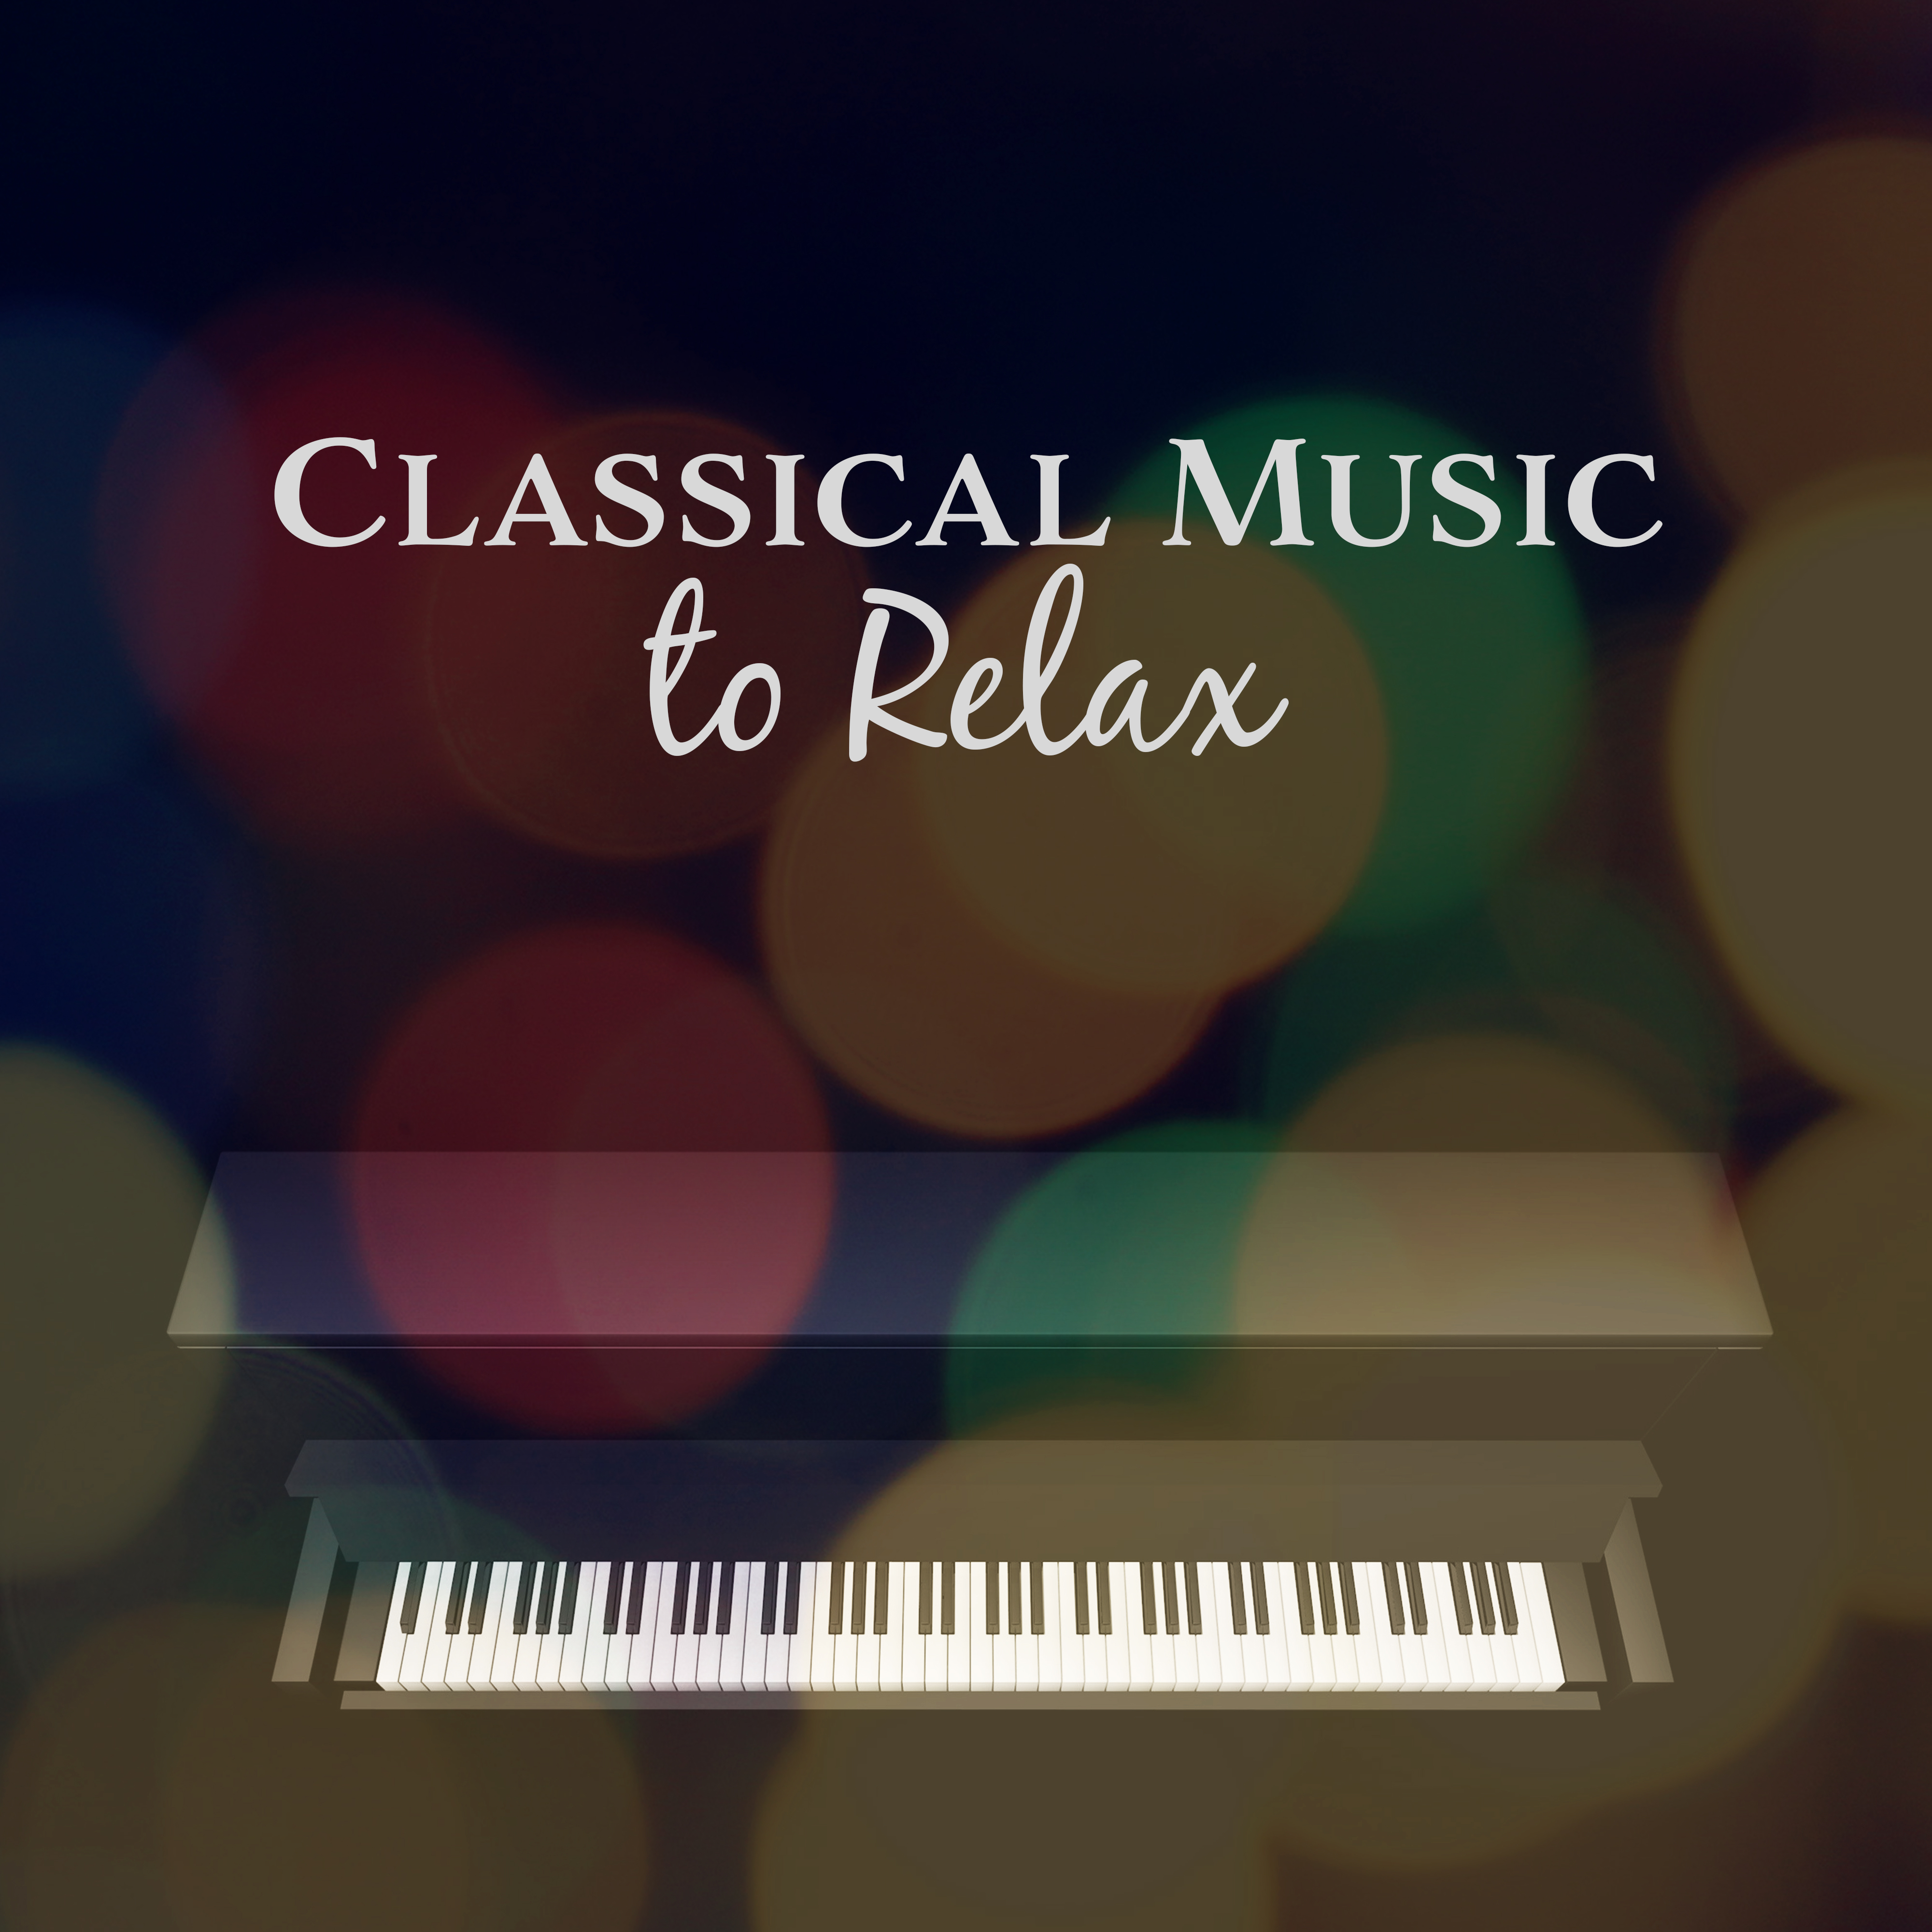 Classical Music to Relax  Soft Sounds to Rest, Classical Music, Relaxing Piano Note